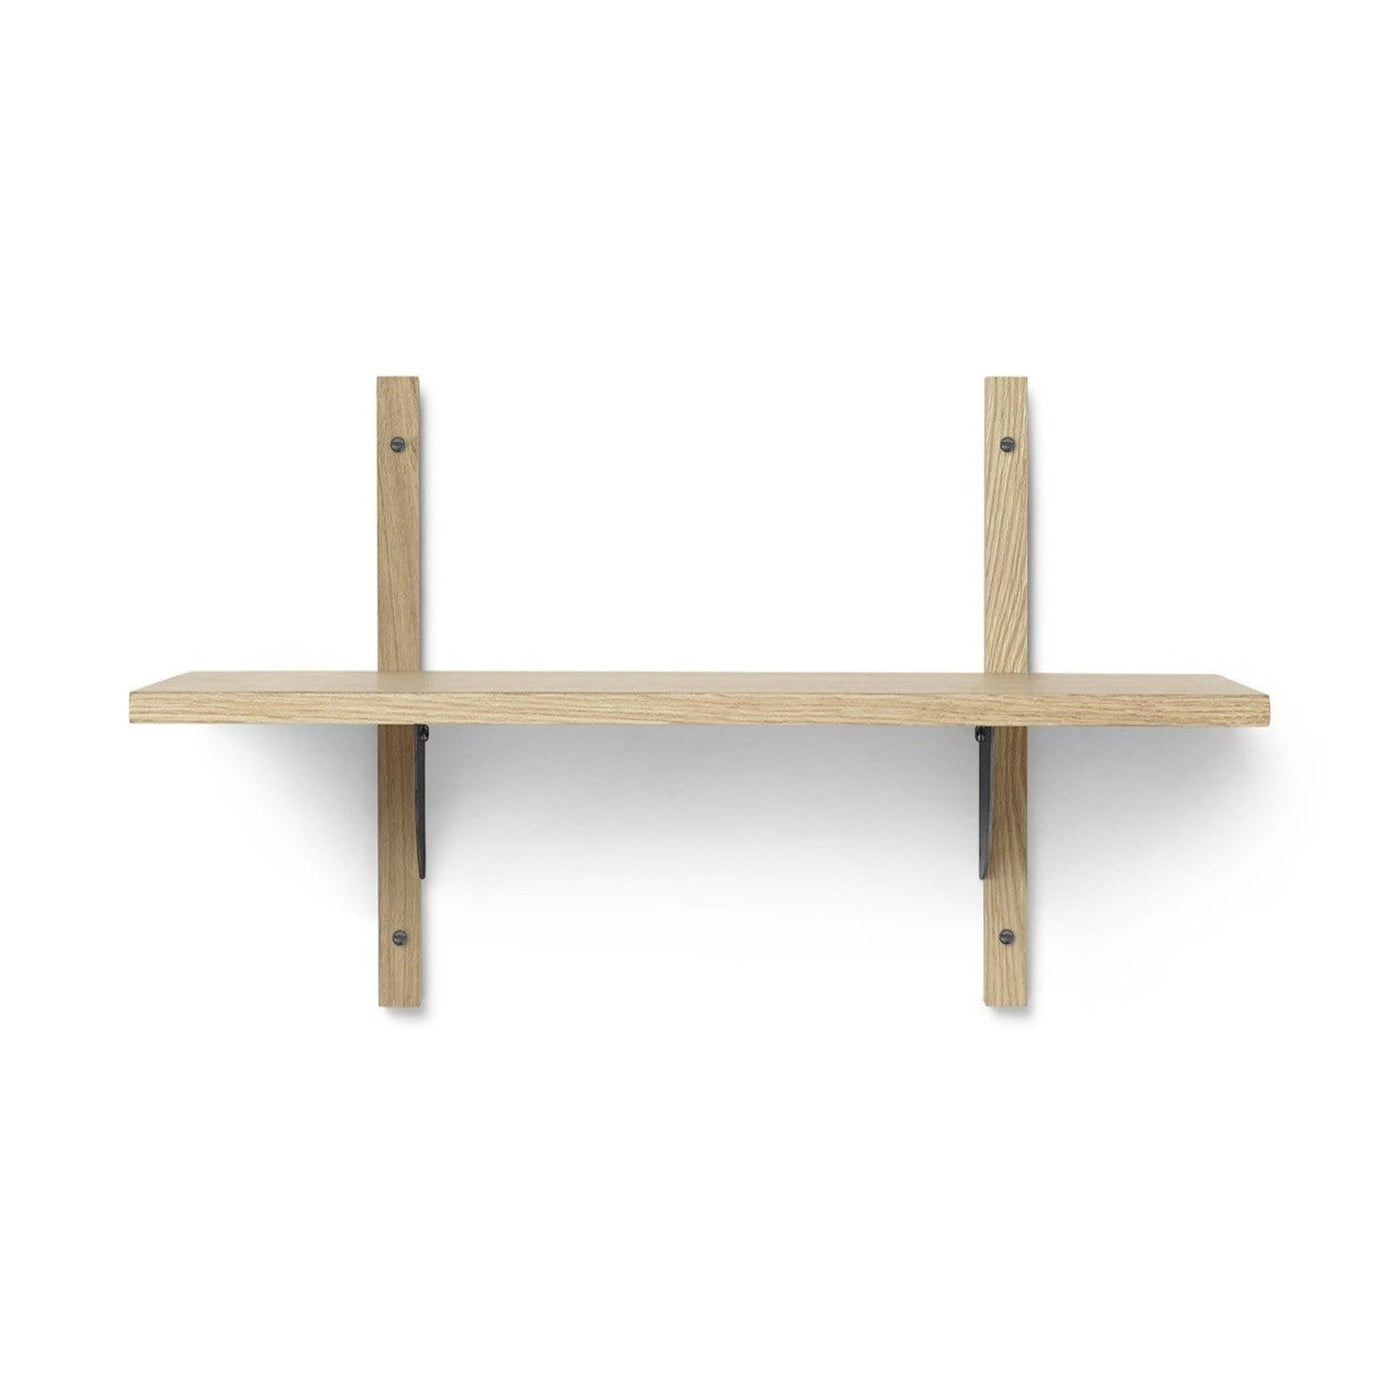 Ferm Living Sector shelf, single narrow in natural oak with blackened brass brackets. Available from someday designs